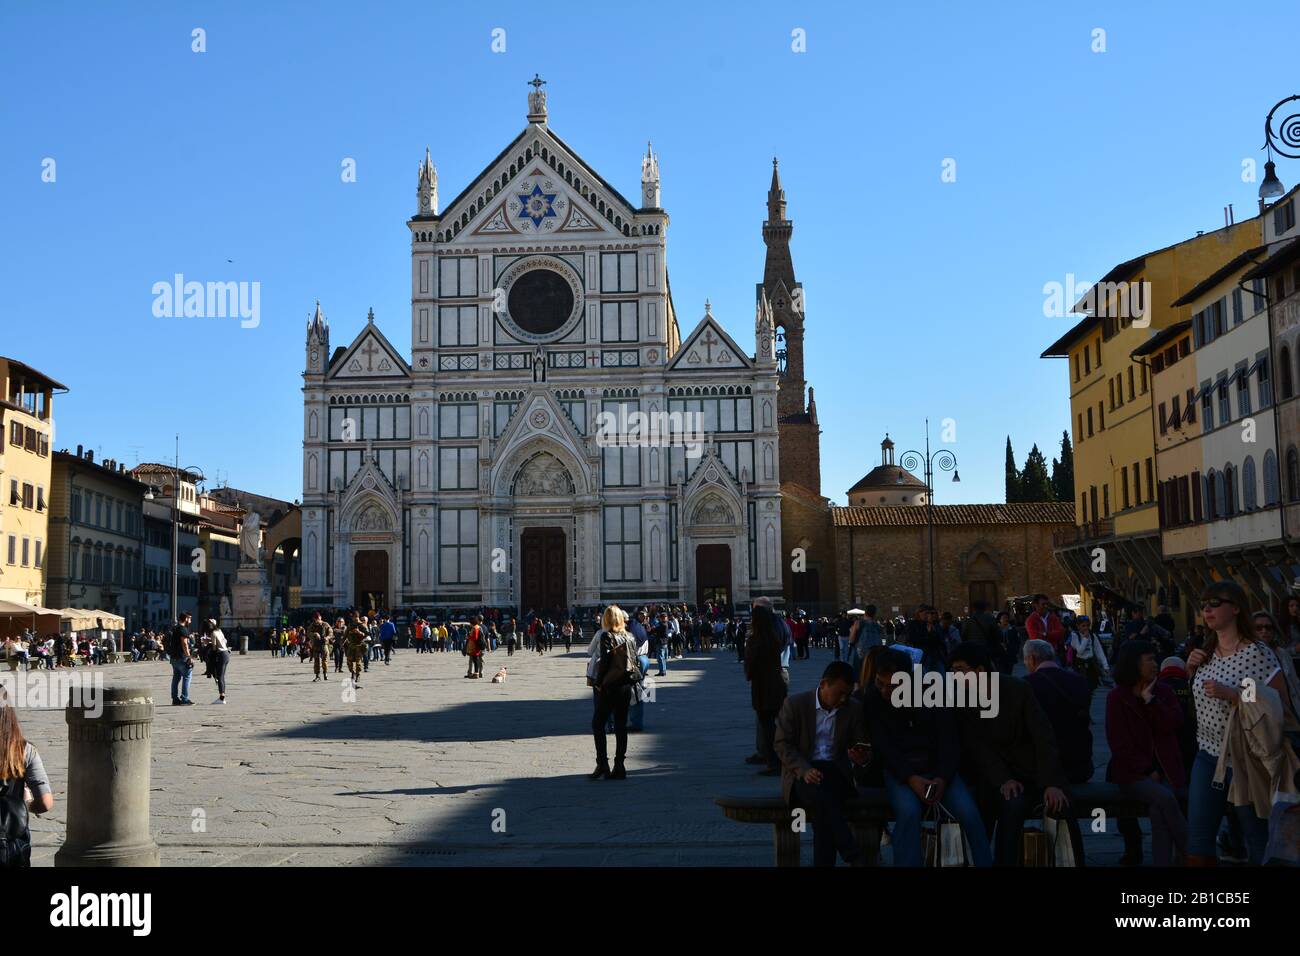 October 2016 - Piazza Santa Croce and Basilica di Santa Croce, the main Franciscan church in Florence, Italy. UNESCO World Heritage Site Stock Photo